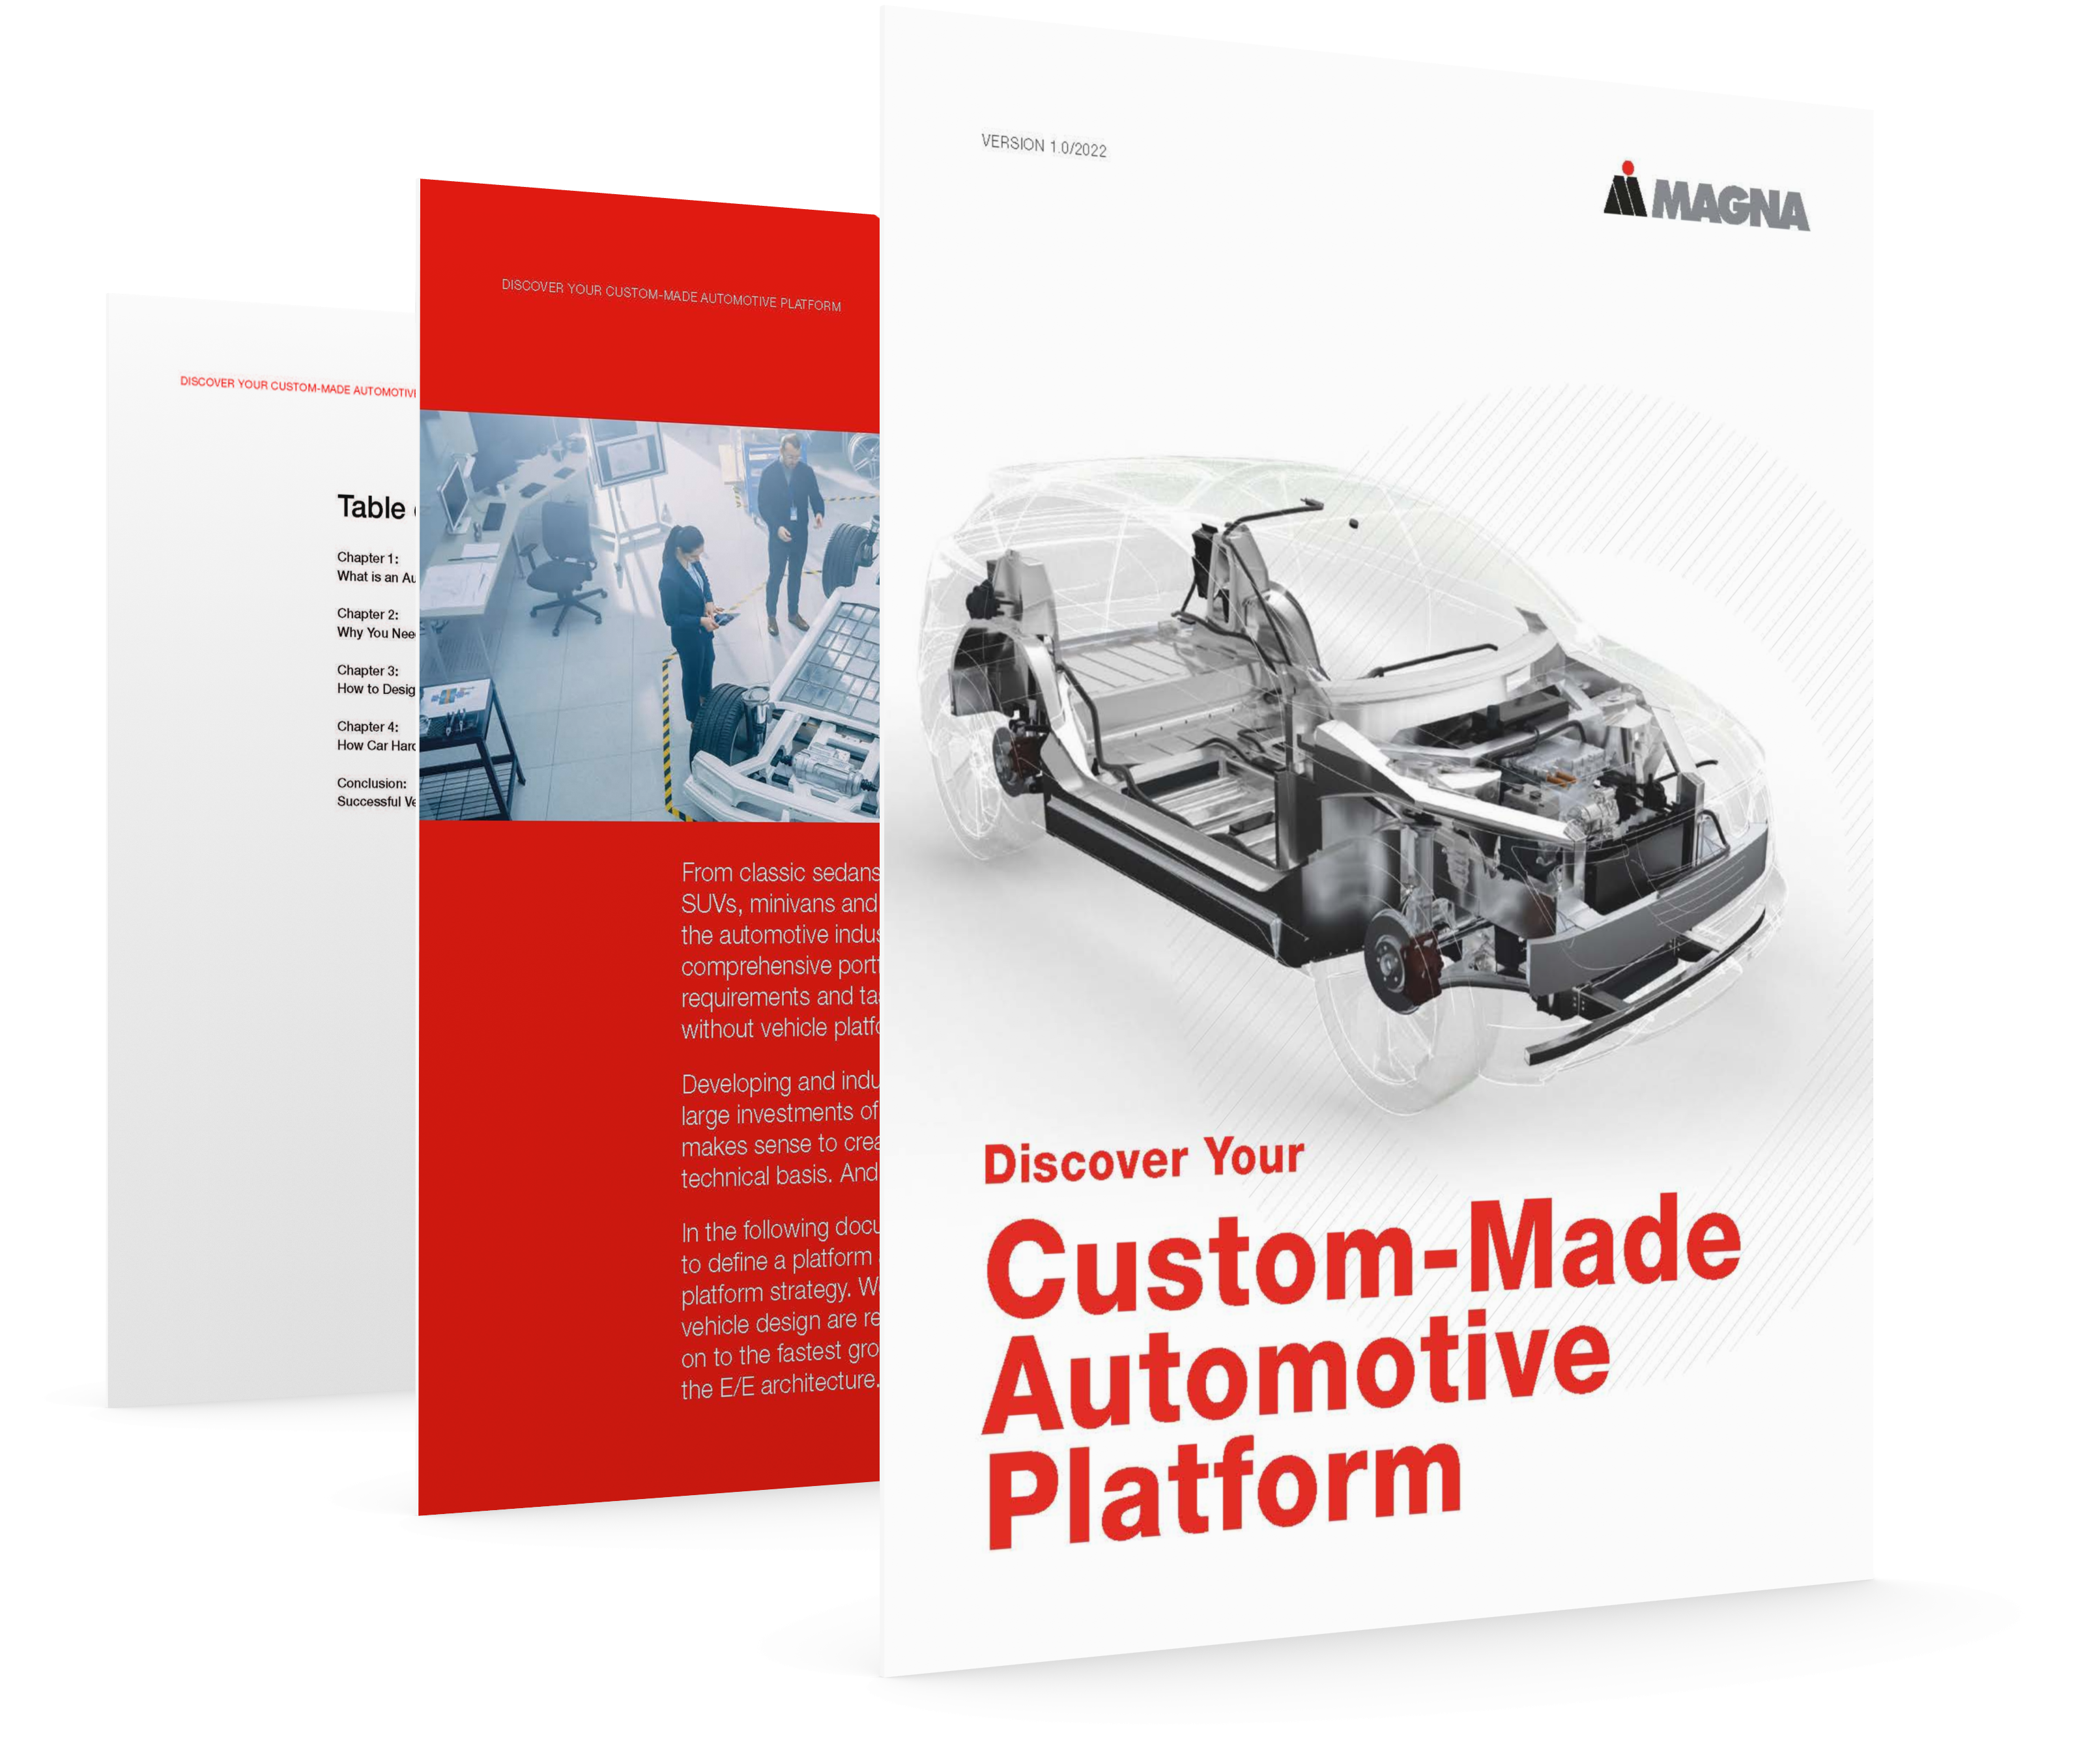 Whitepaper From Magna About Car Platforms